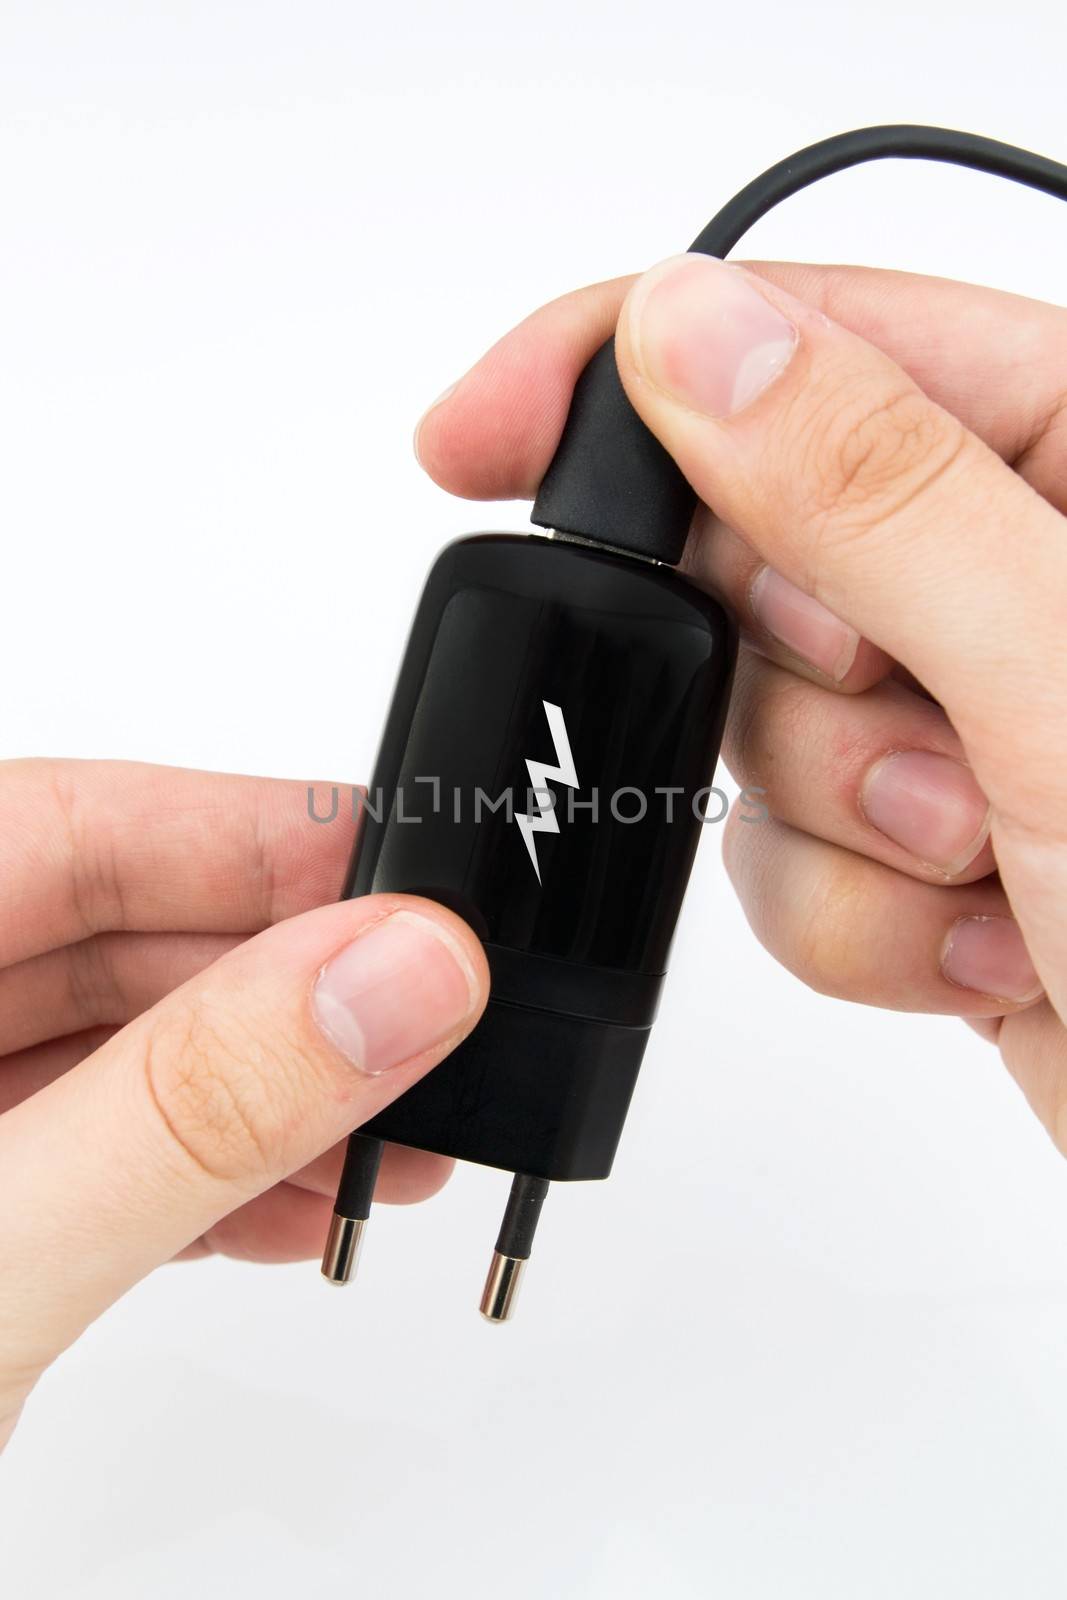 Man using black USB phone charger by simpson33